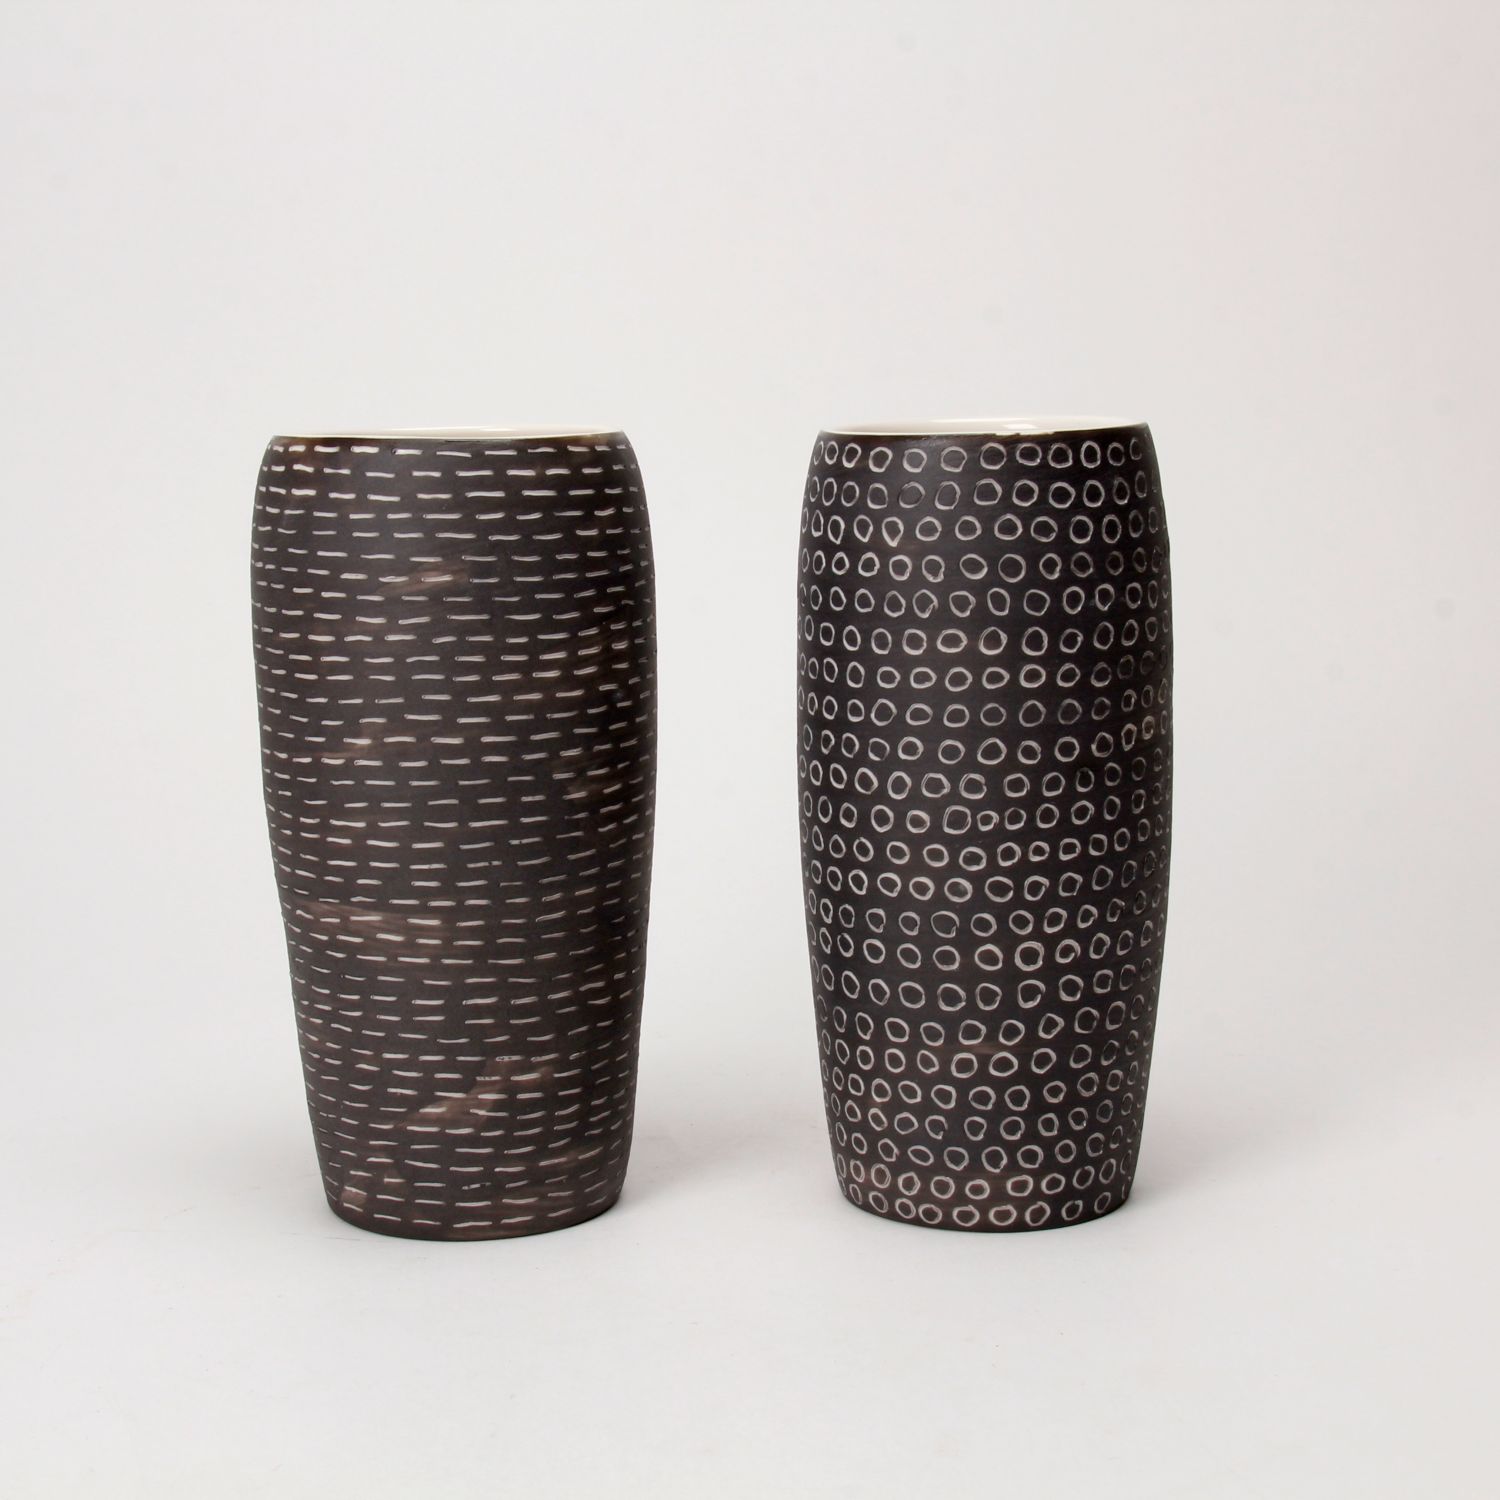 Cuir Ceramics: Black and White Vase Product Image 4 of 5